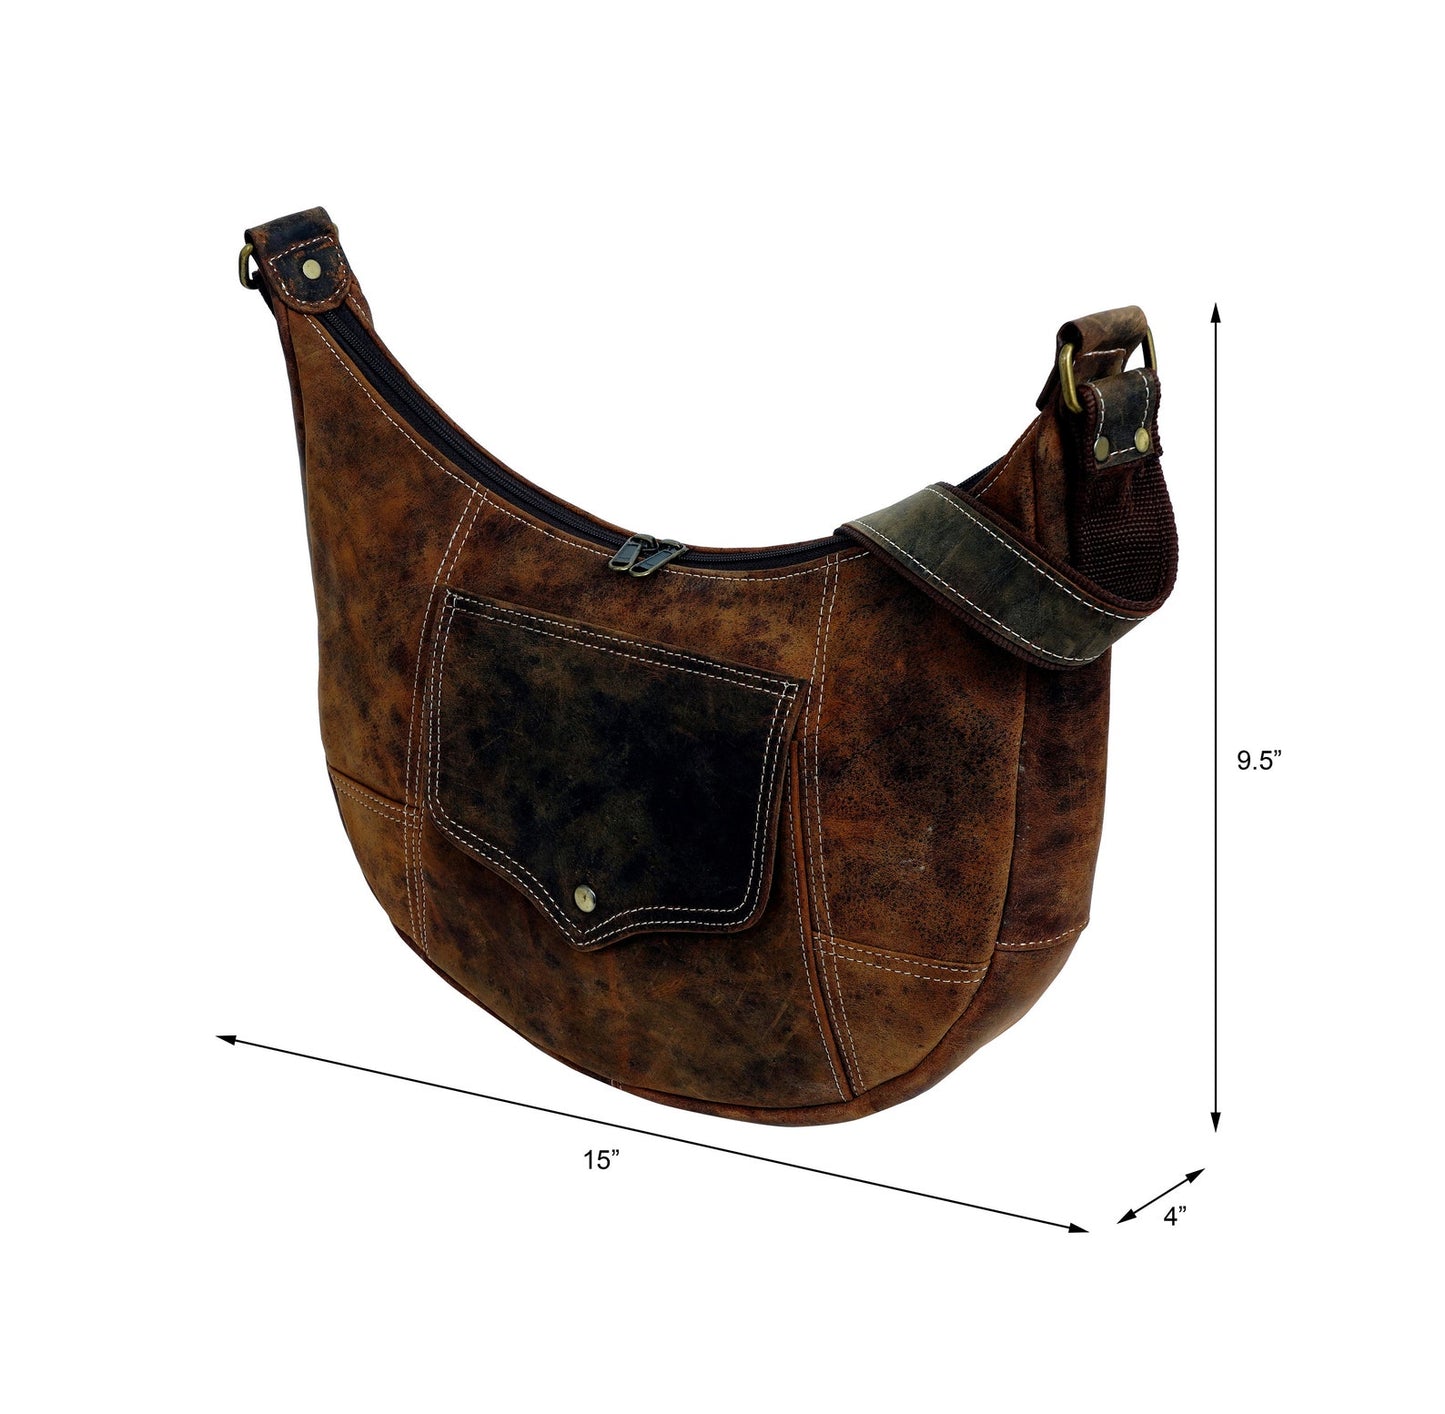 Real Genuine Leather Moon Bag